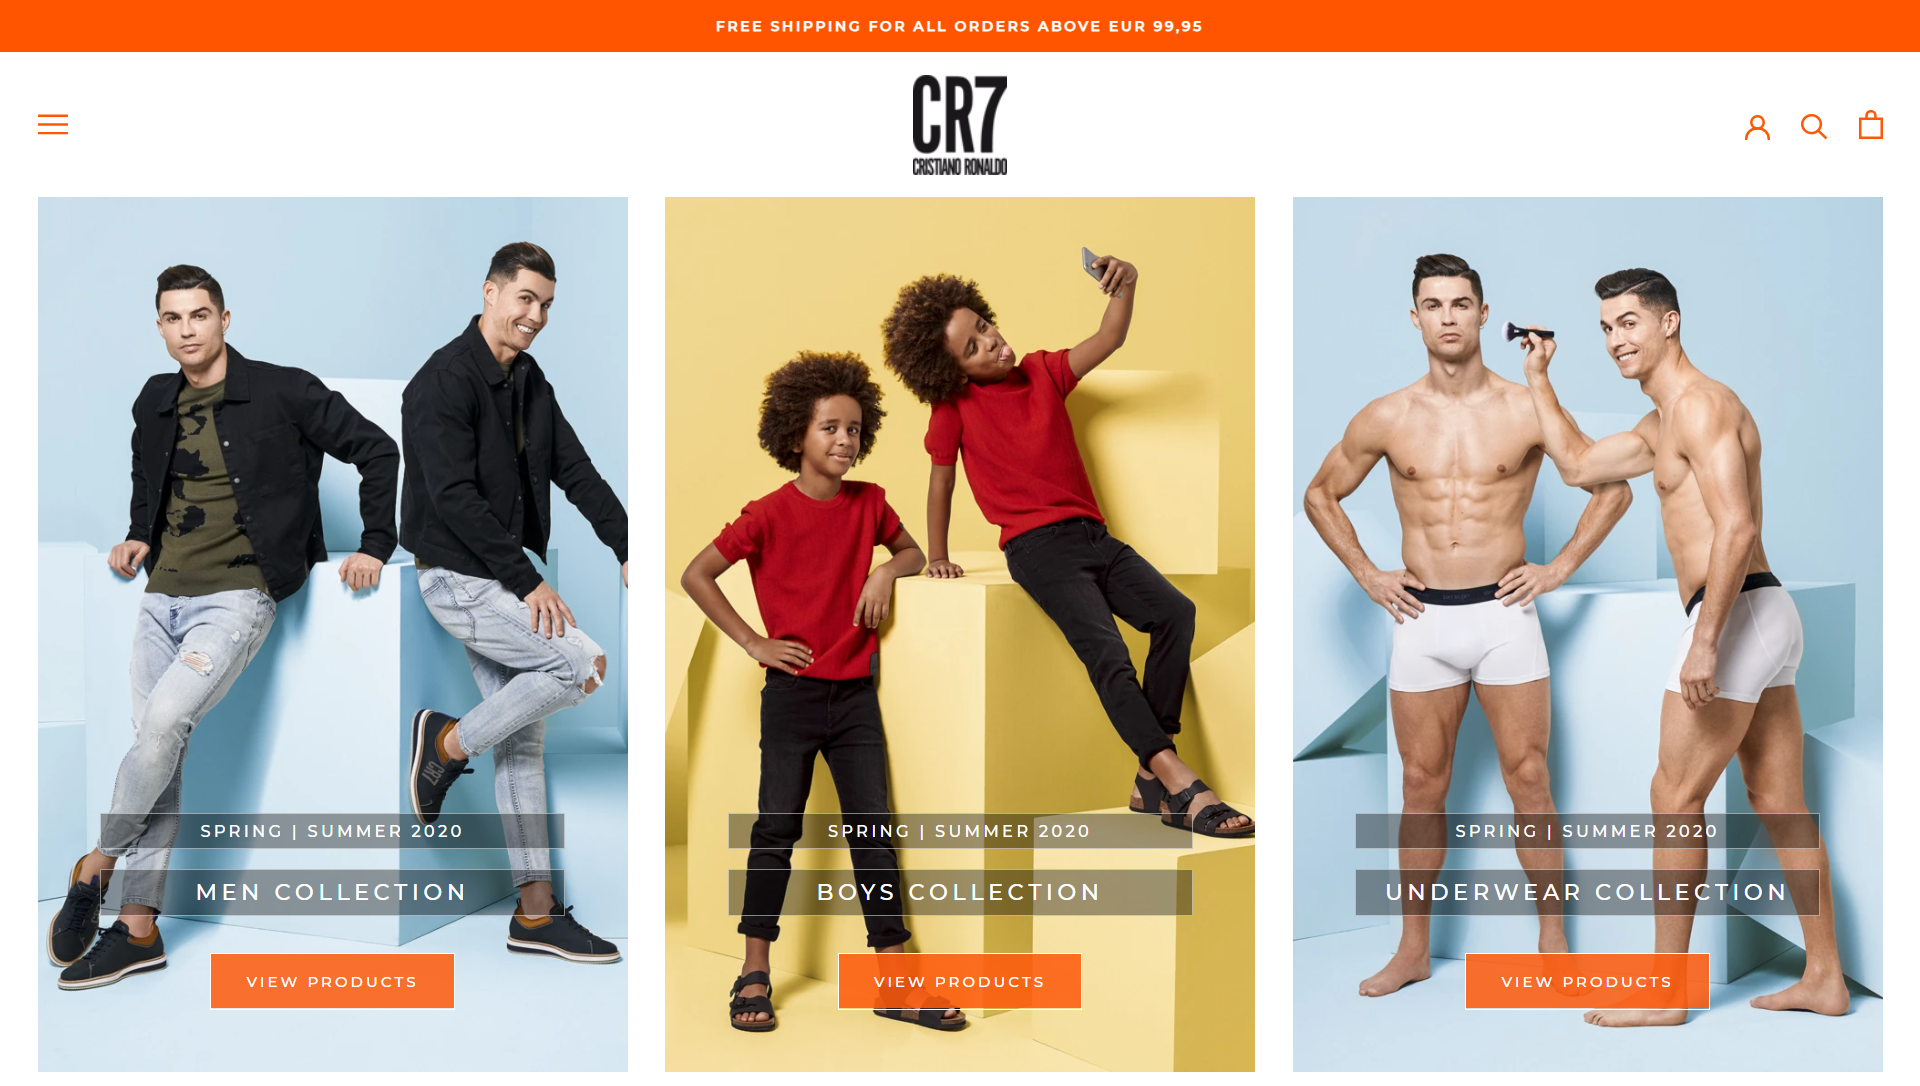 CR7 top Shopify store homepage by Cristiano Ronaldo